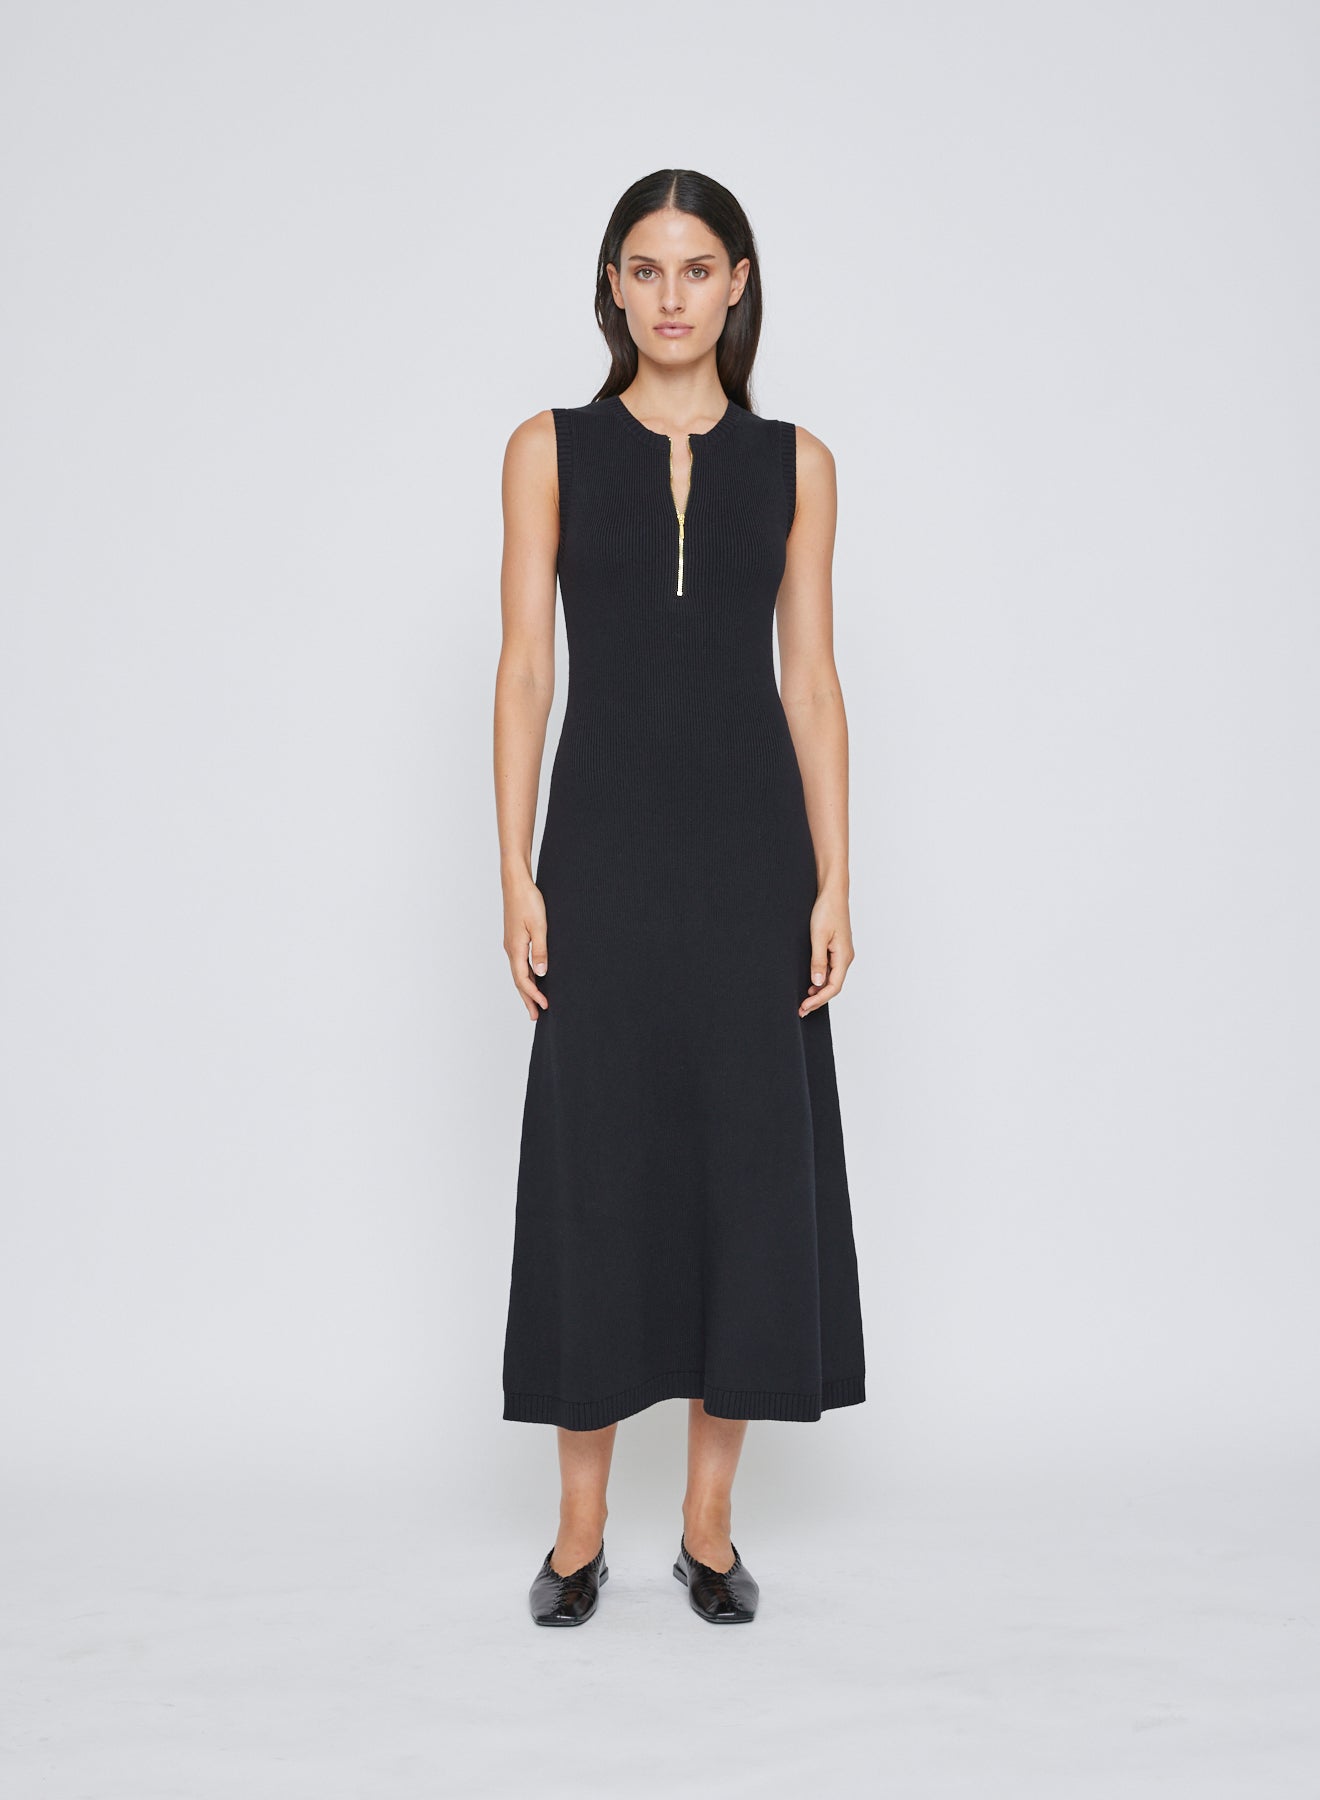 The ANNA QUAN Jennie Dress in Raven is an elevated day to night midi dress, cut in 100% cotton knit. Featuring a sleeveless design and zip closure at the bust.